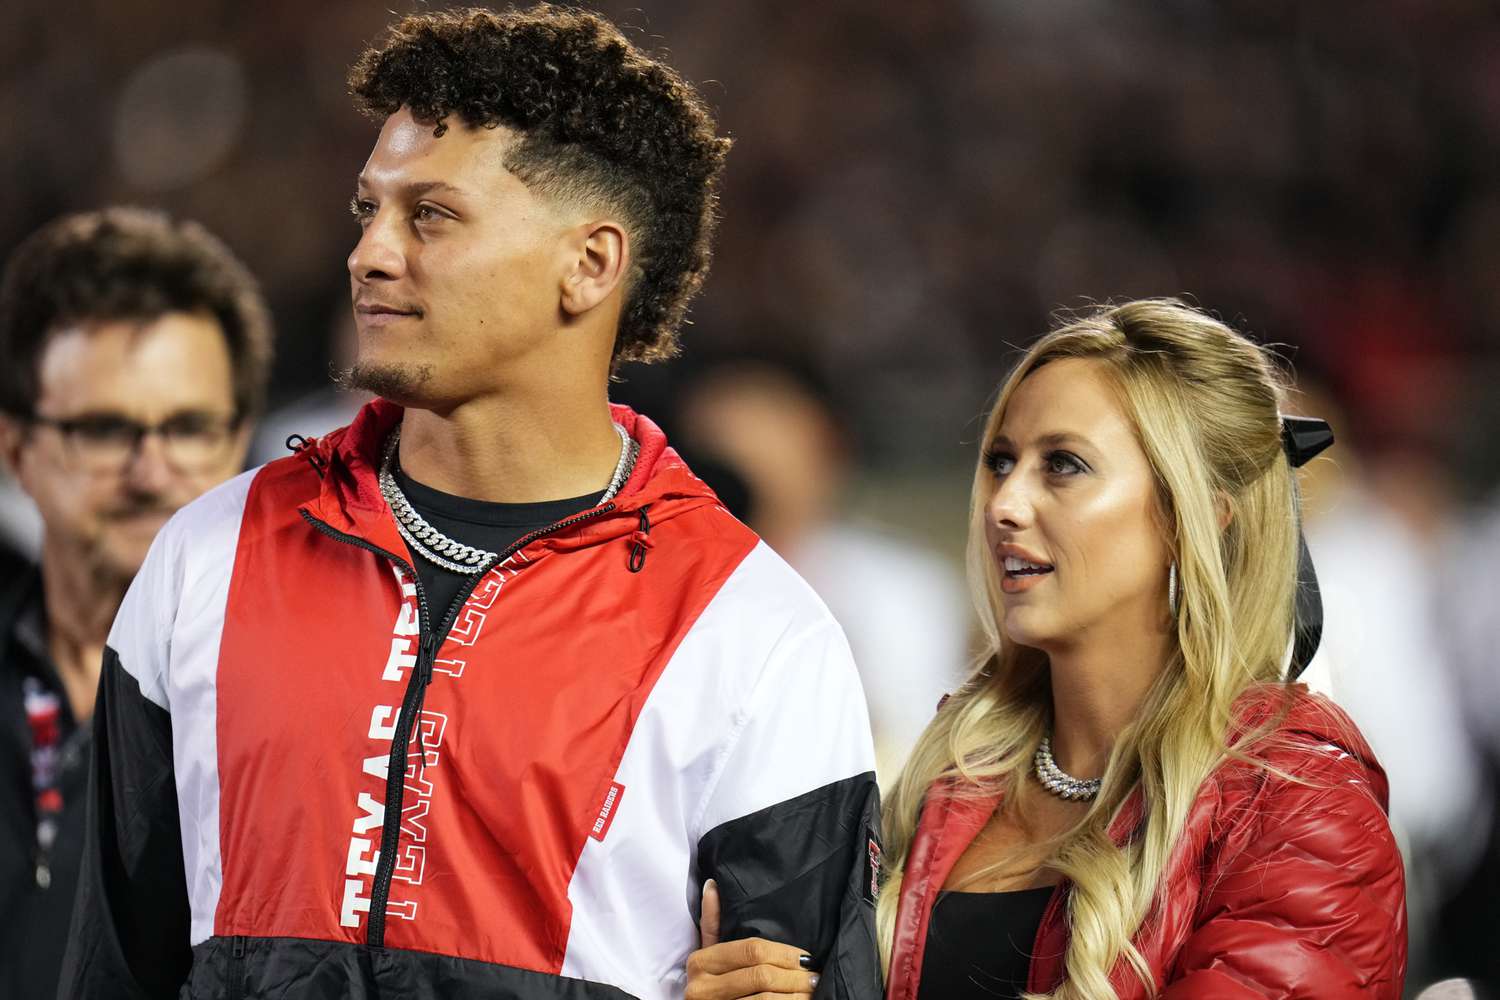 Patrick Mahomes Gets Inducted into Texas Tech's Hall of Fame